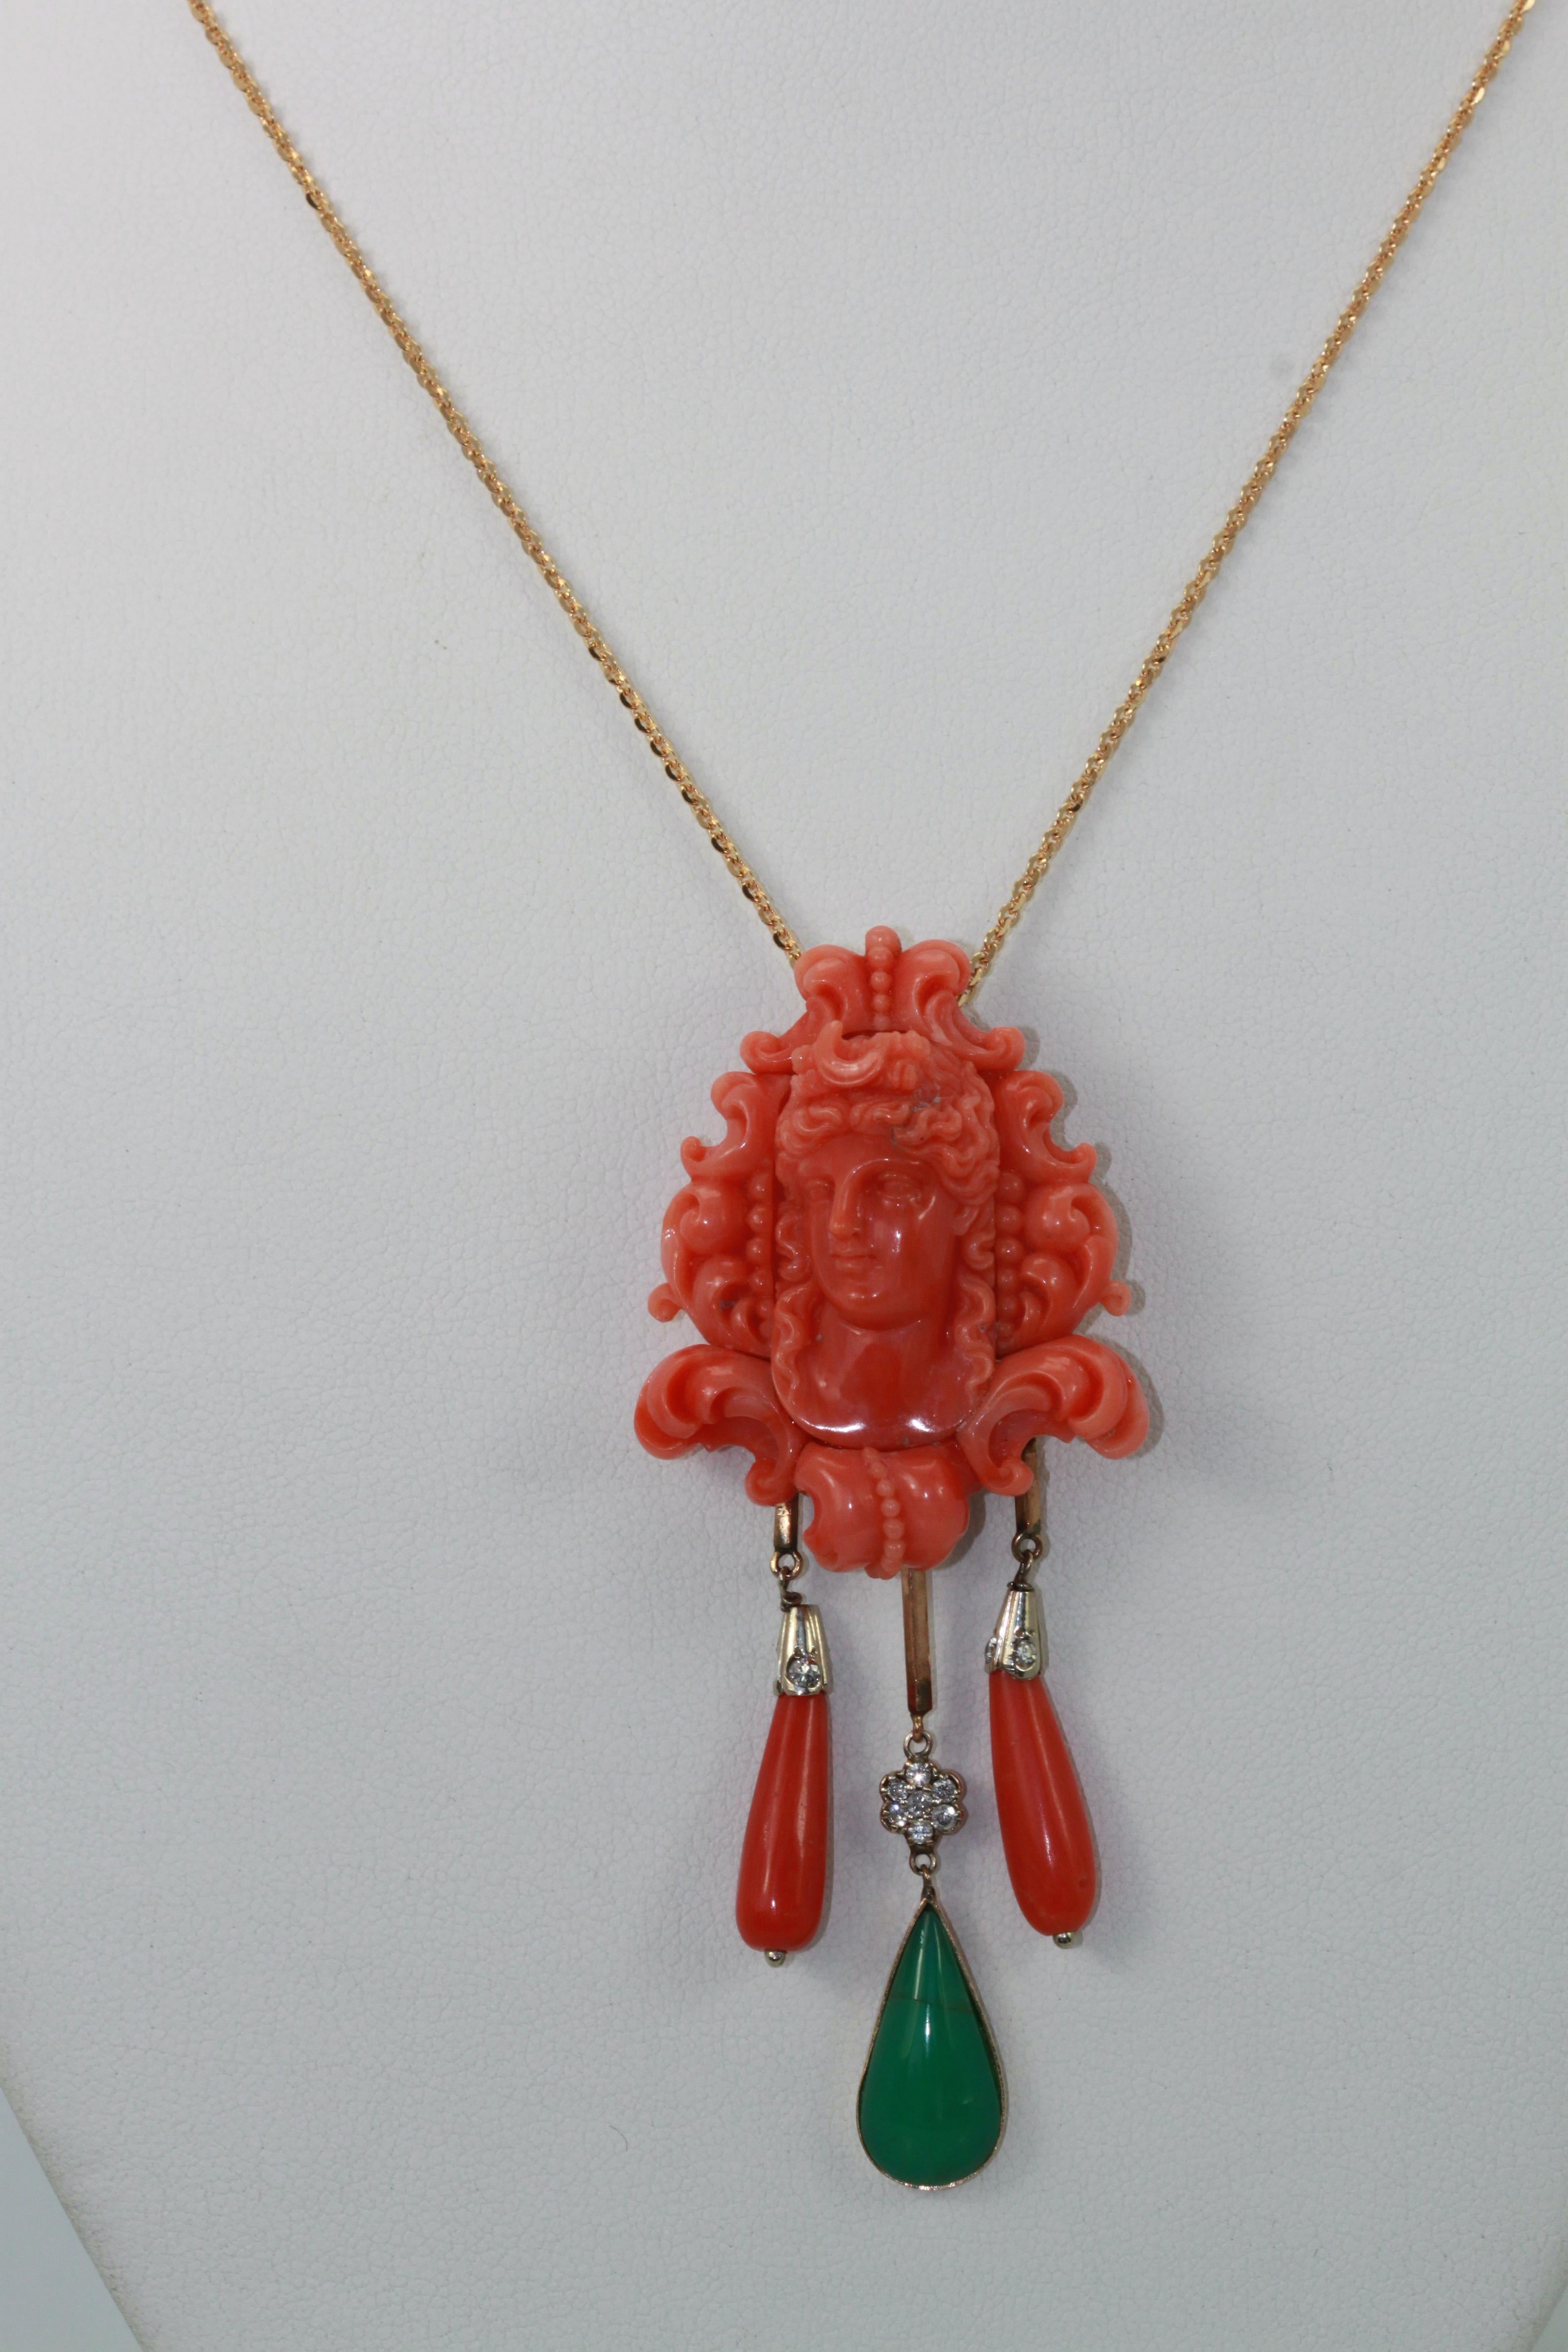 Carved Coral Brooch Pendant W/ Coral Drops and Crystophase Drop For Sale 5